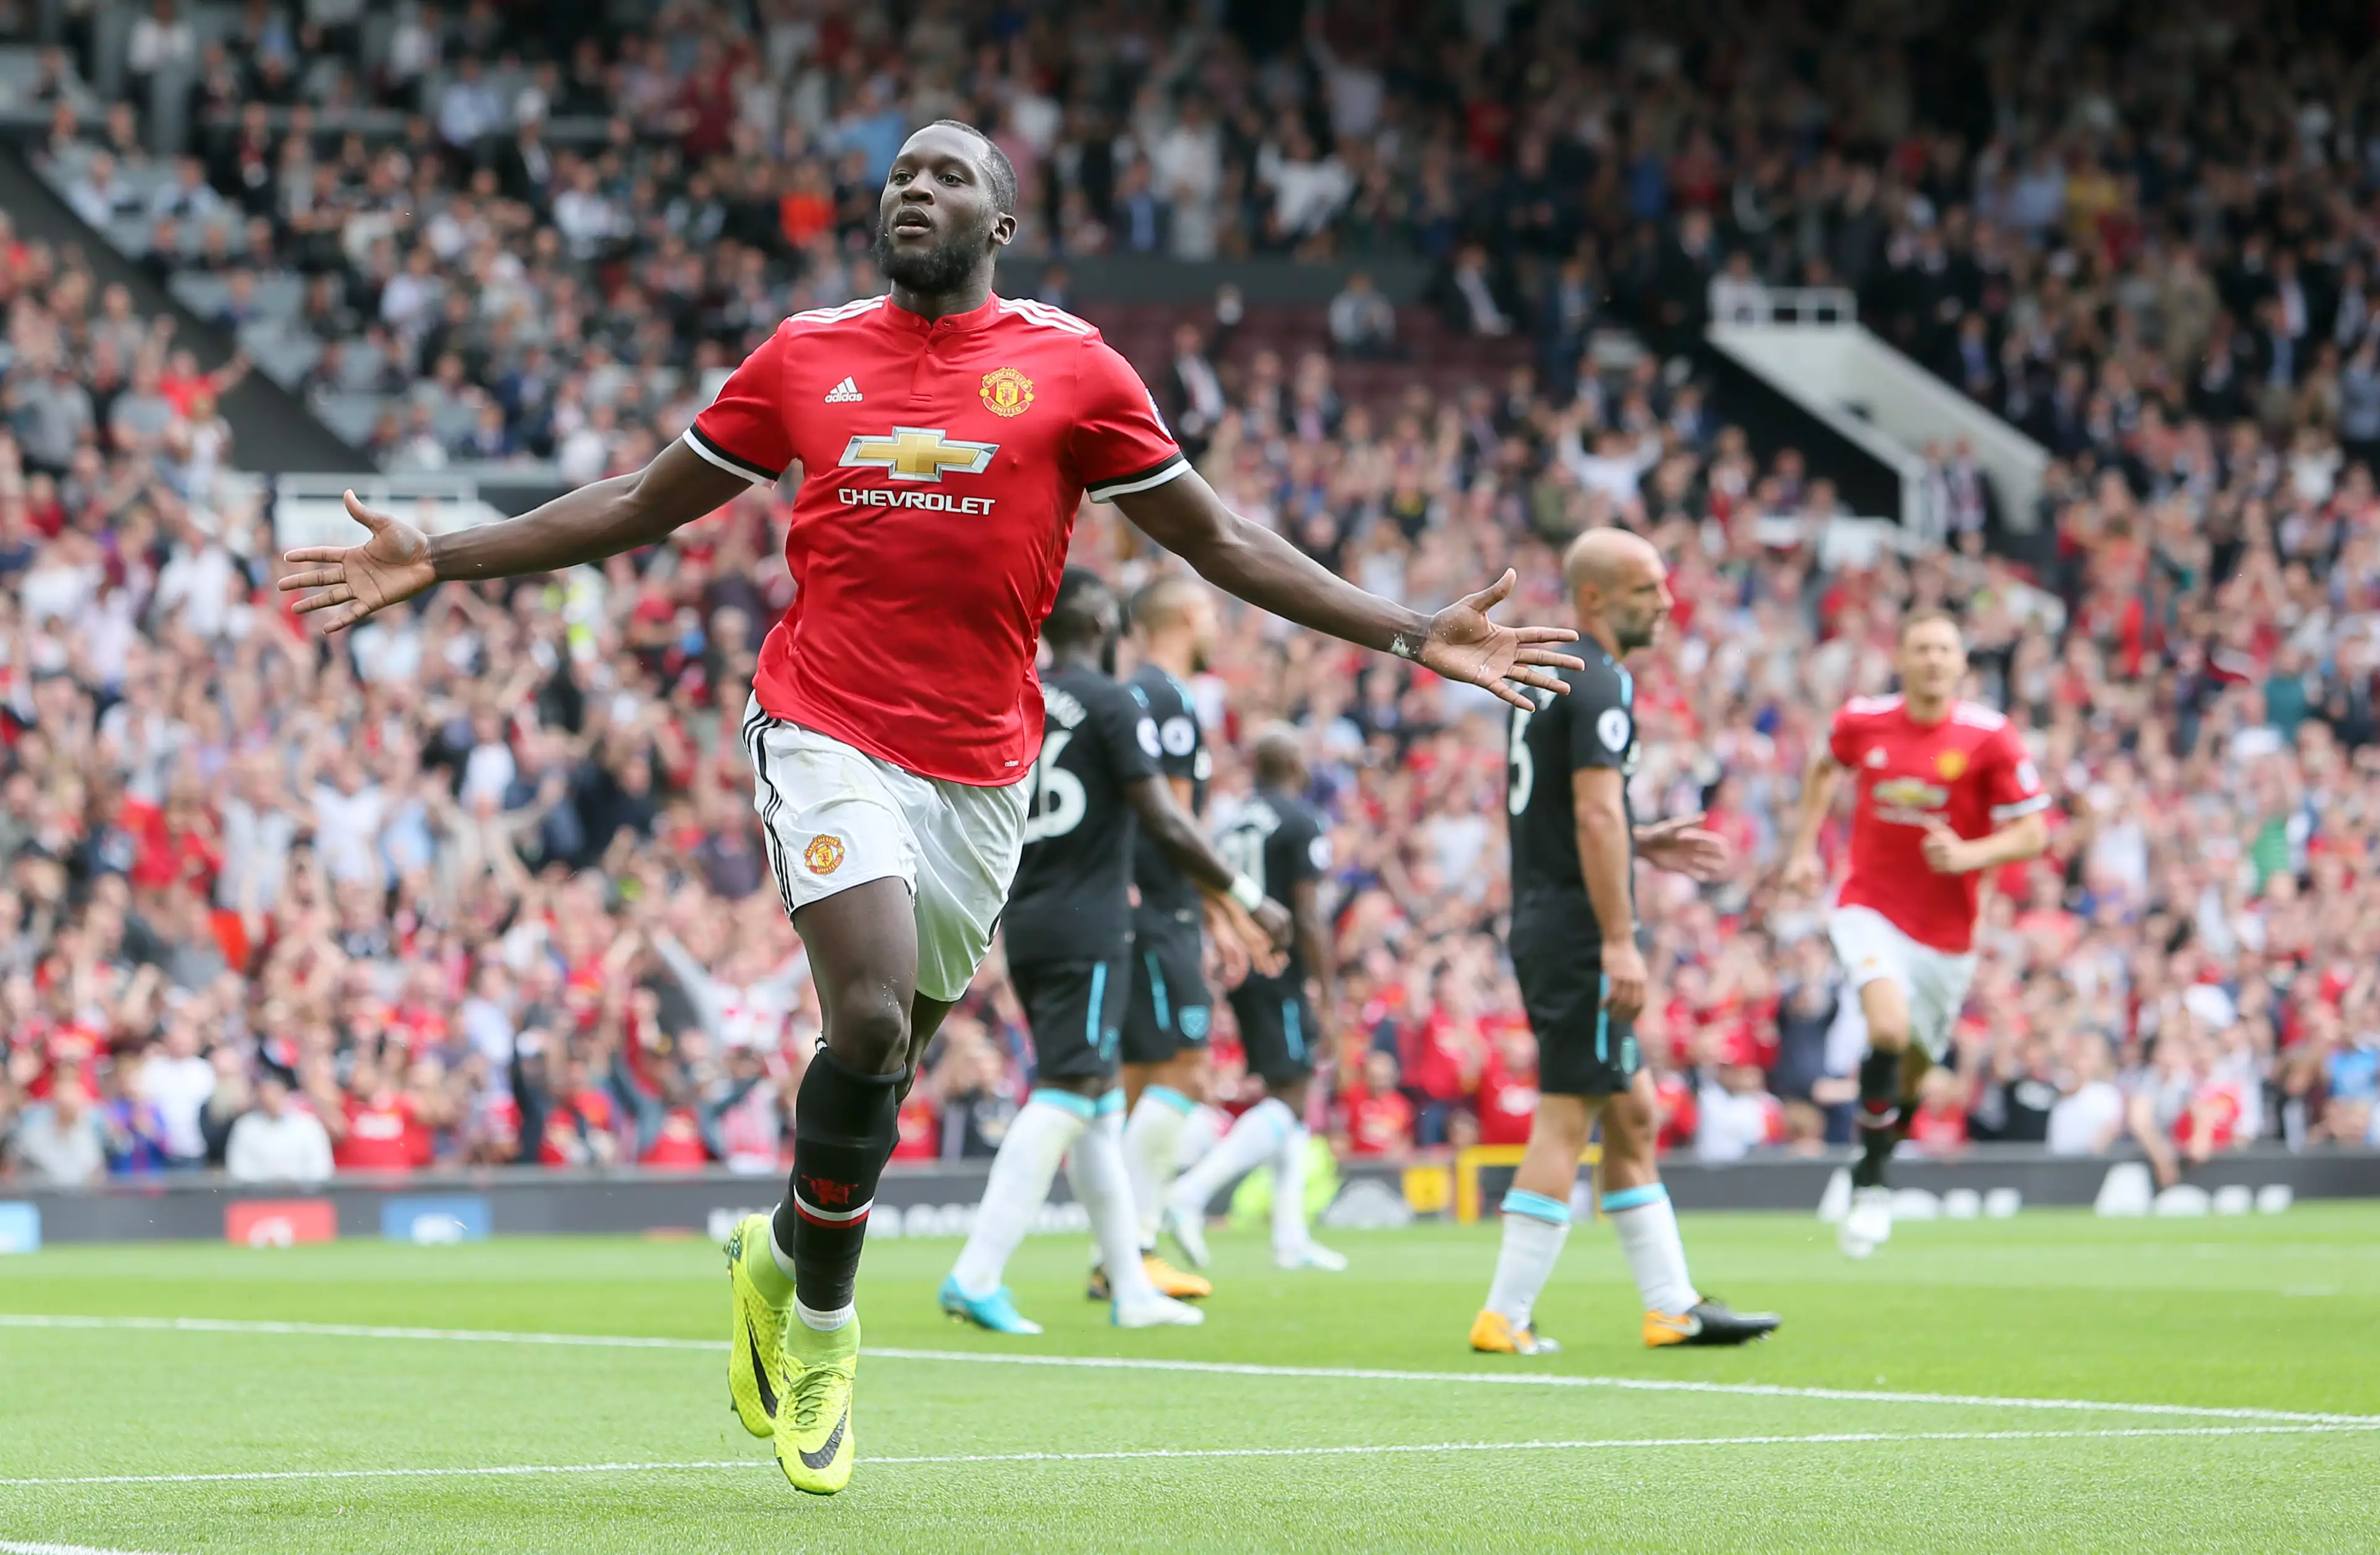 Lukaku did well for United but didn't fit in with Ole Gunnar Solskjaer's plans. Image: PA Images